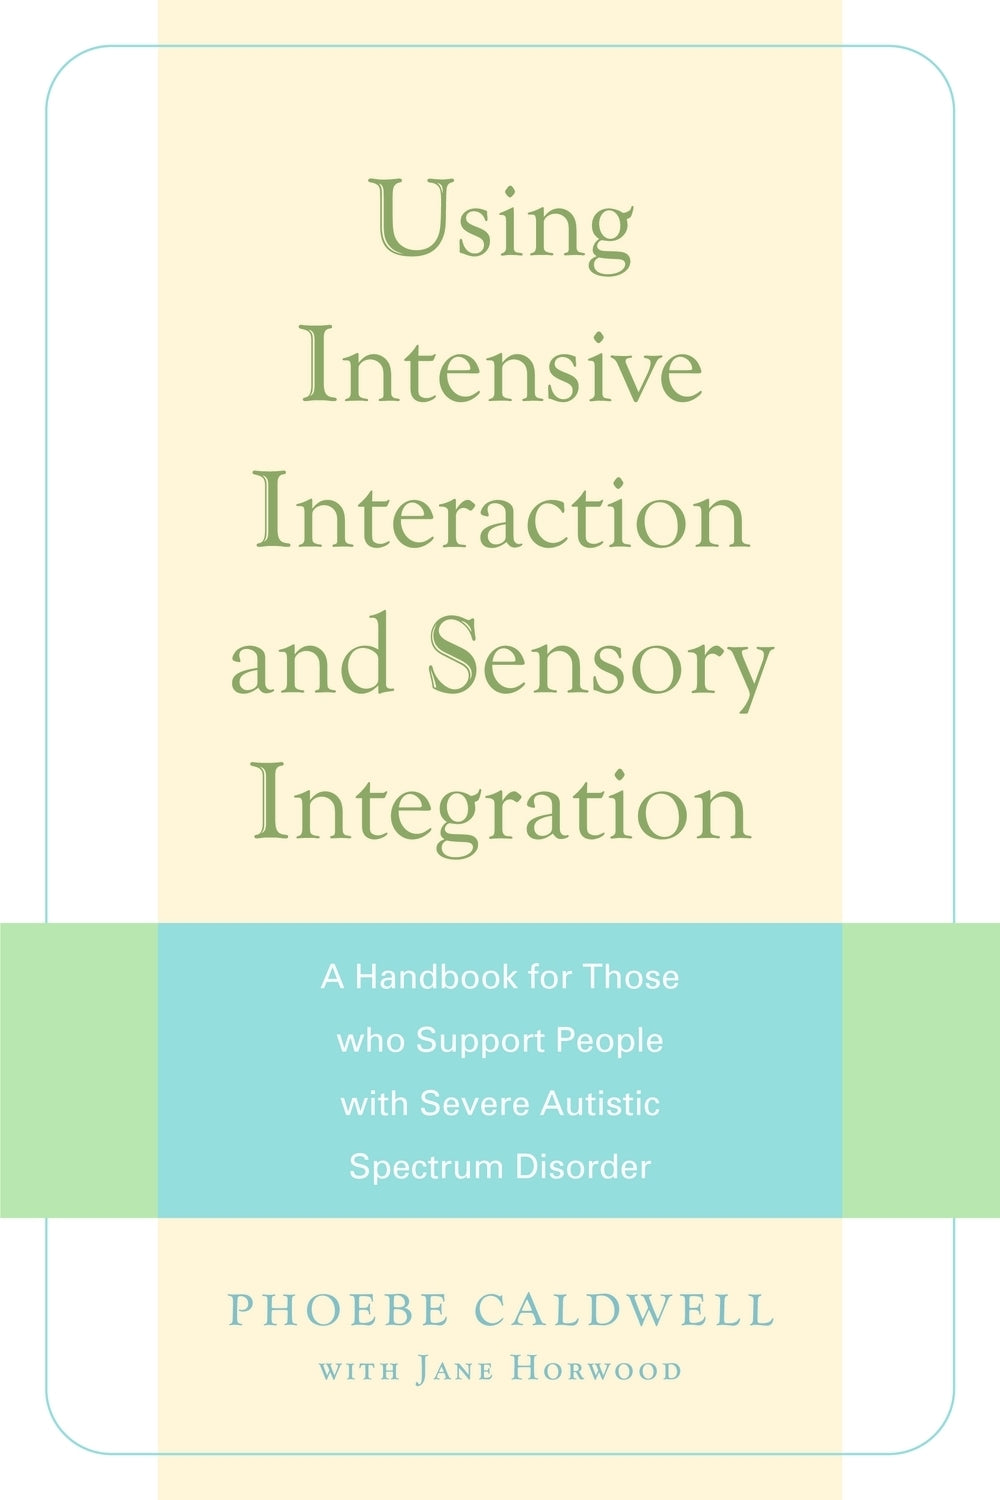 Using Intensive Interaction and Sensory Integration by Jane Horwood, Phoebe Caldwell